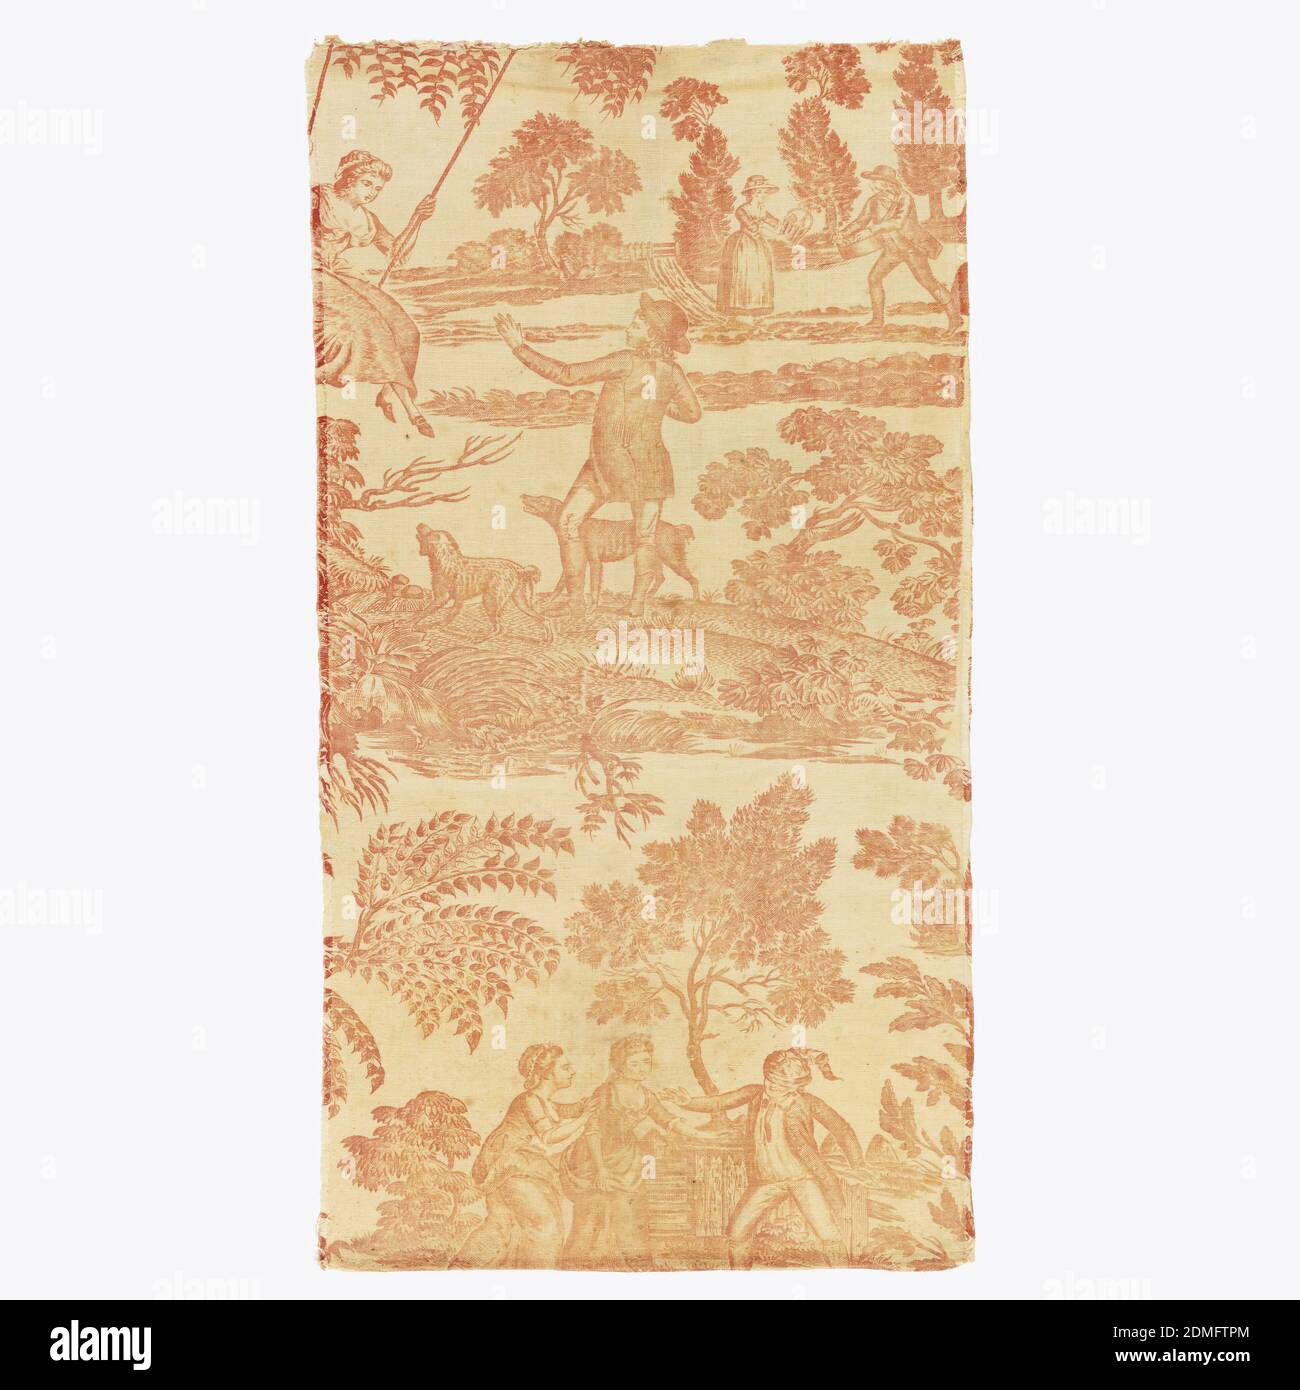 Fragment, Medium: cotton Technique: copperplate printed on plain weave, Textile fragment. Figures play 'blind man’s buff' in a rustic setting with water fowl. Above, a man pushes a woman on a swing while dogs look on. Behind stands a man and woman with picnic basket. Each piece is composed of several pieces sewn together., England, late 18th century, printed, dyed & painted textiles, Fragment Stock Photo